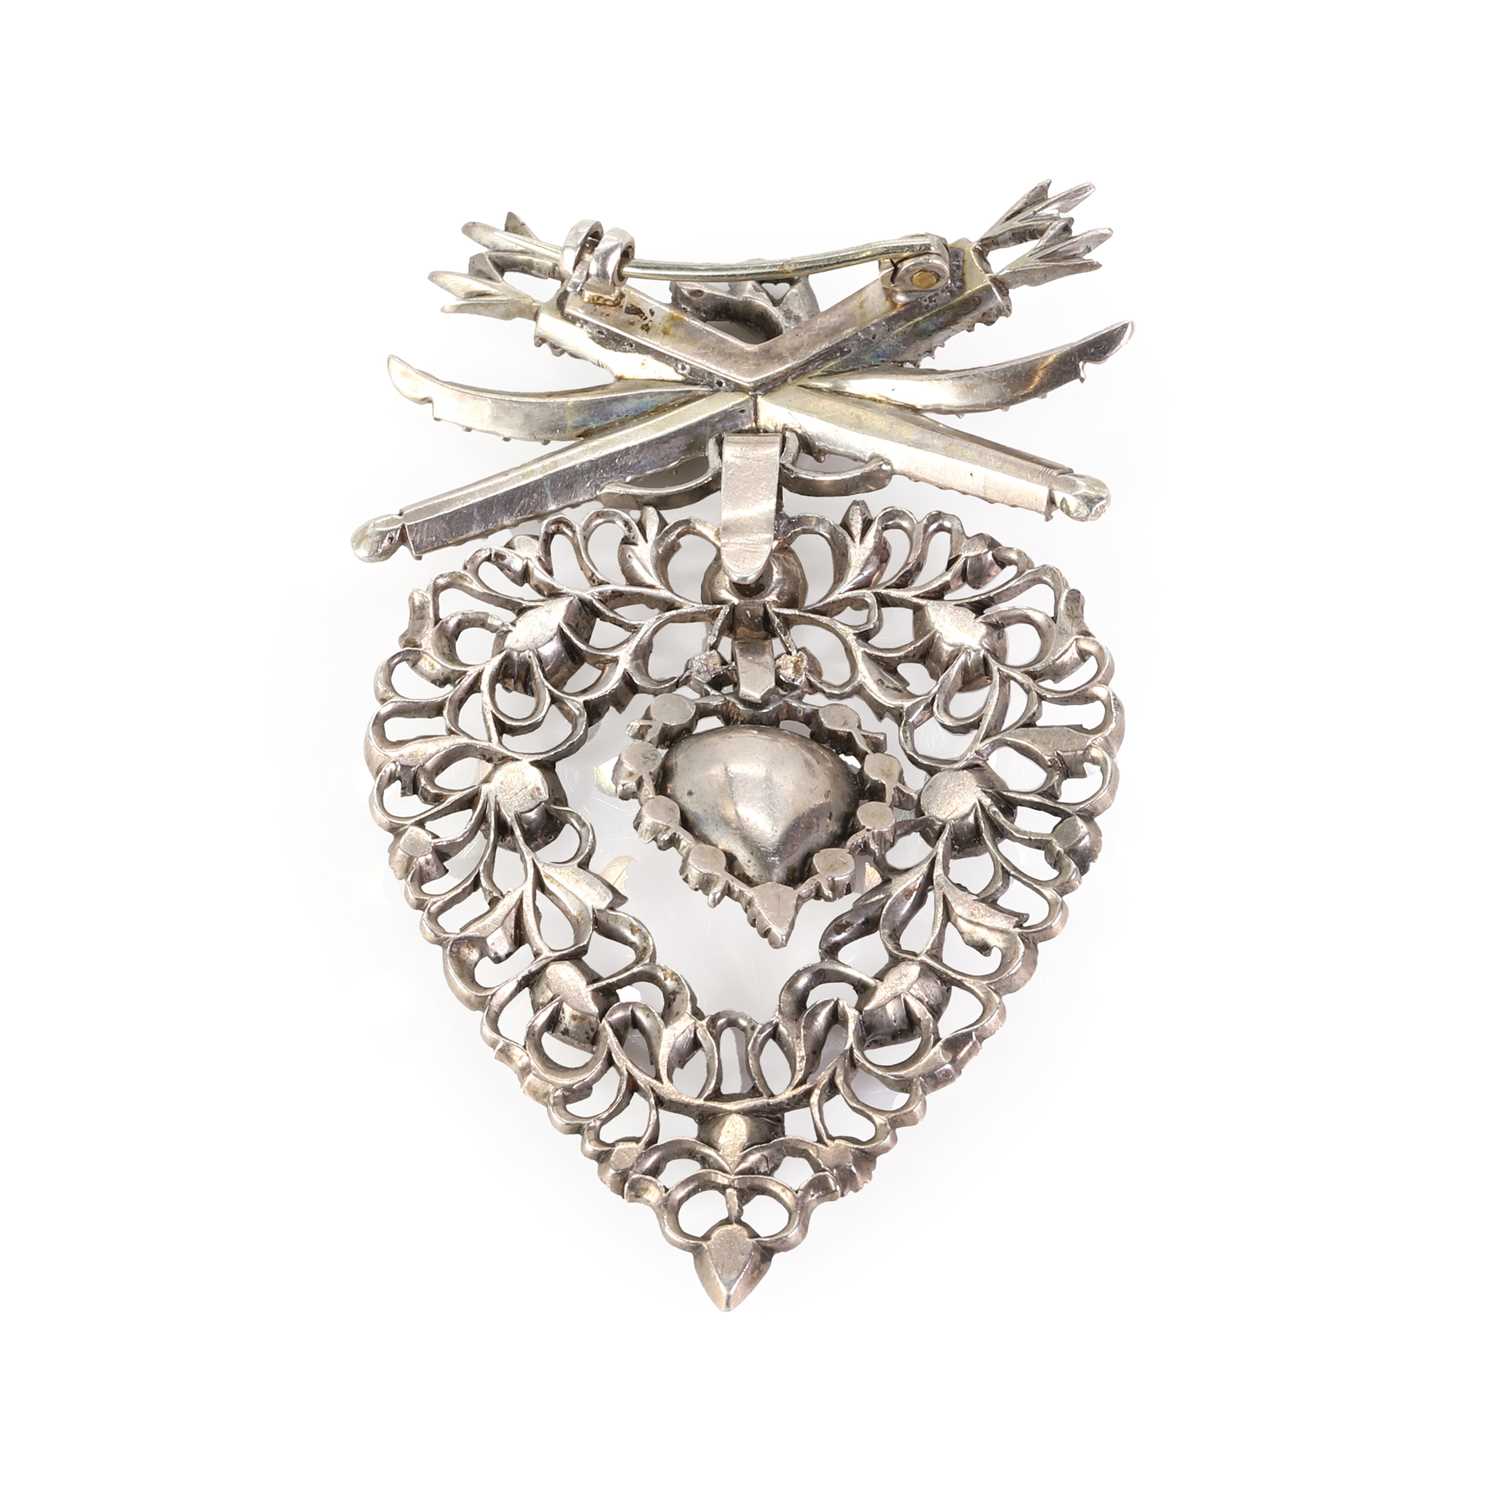 An antique silver and gold, diamond set Flemish/Vlaams heart brooch, - Image 2 of 2